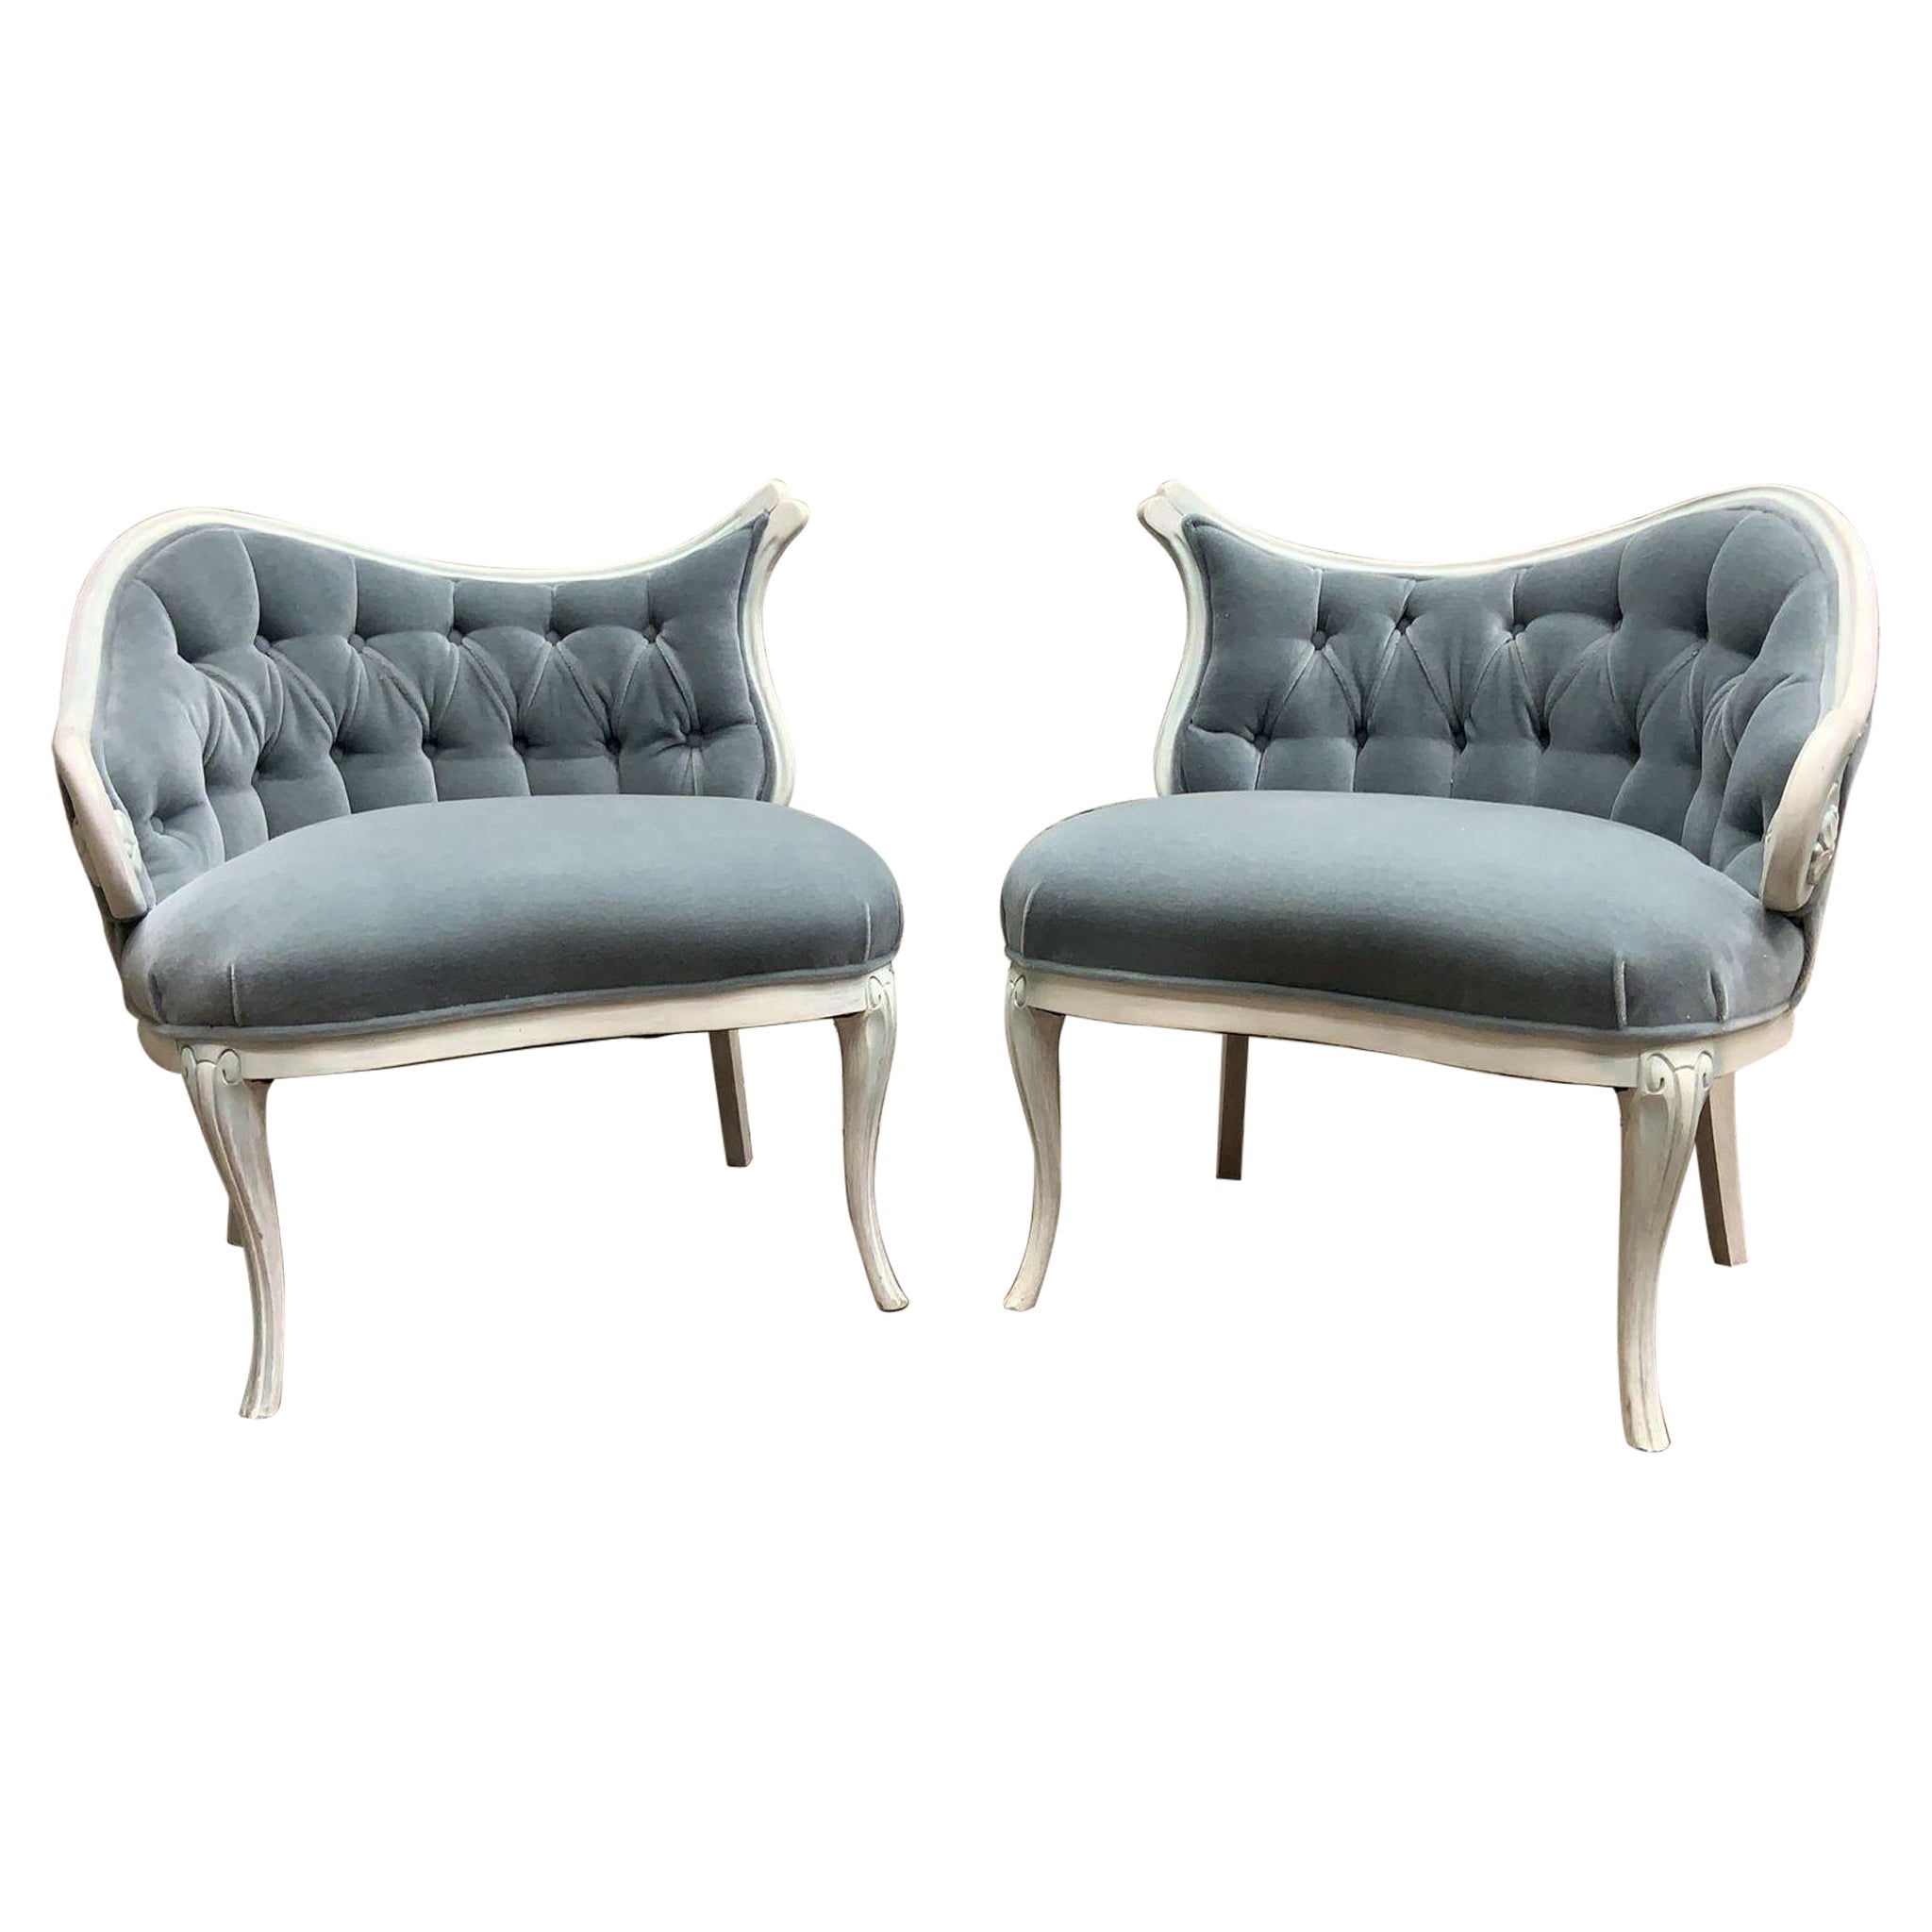 Vintage French Rococo Style Asymmetrical Fireside Ice Blue Mohair Chairs - Pair For Sale